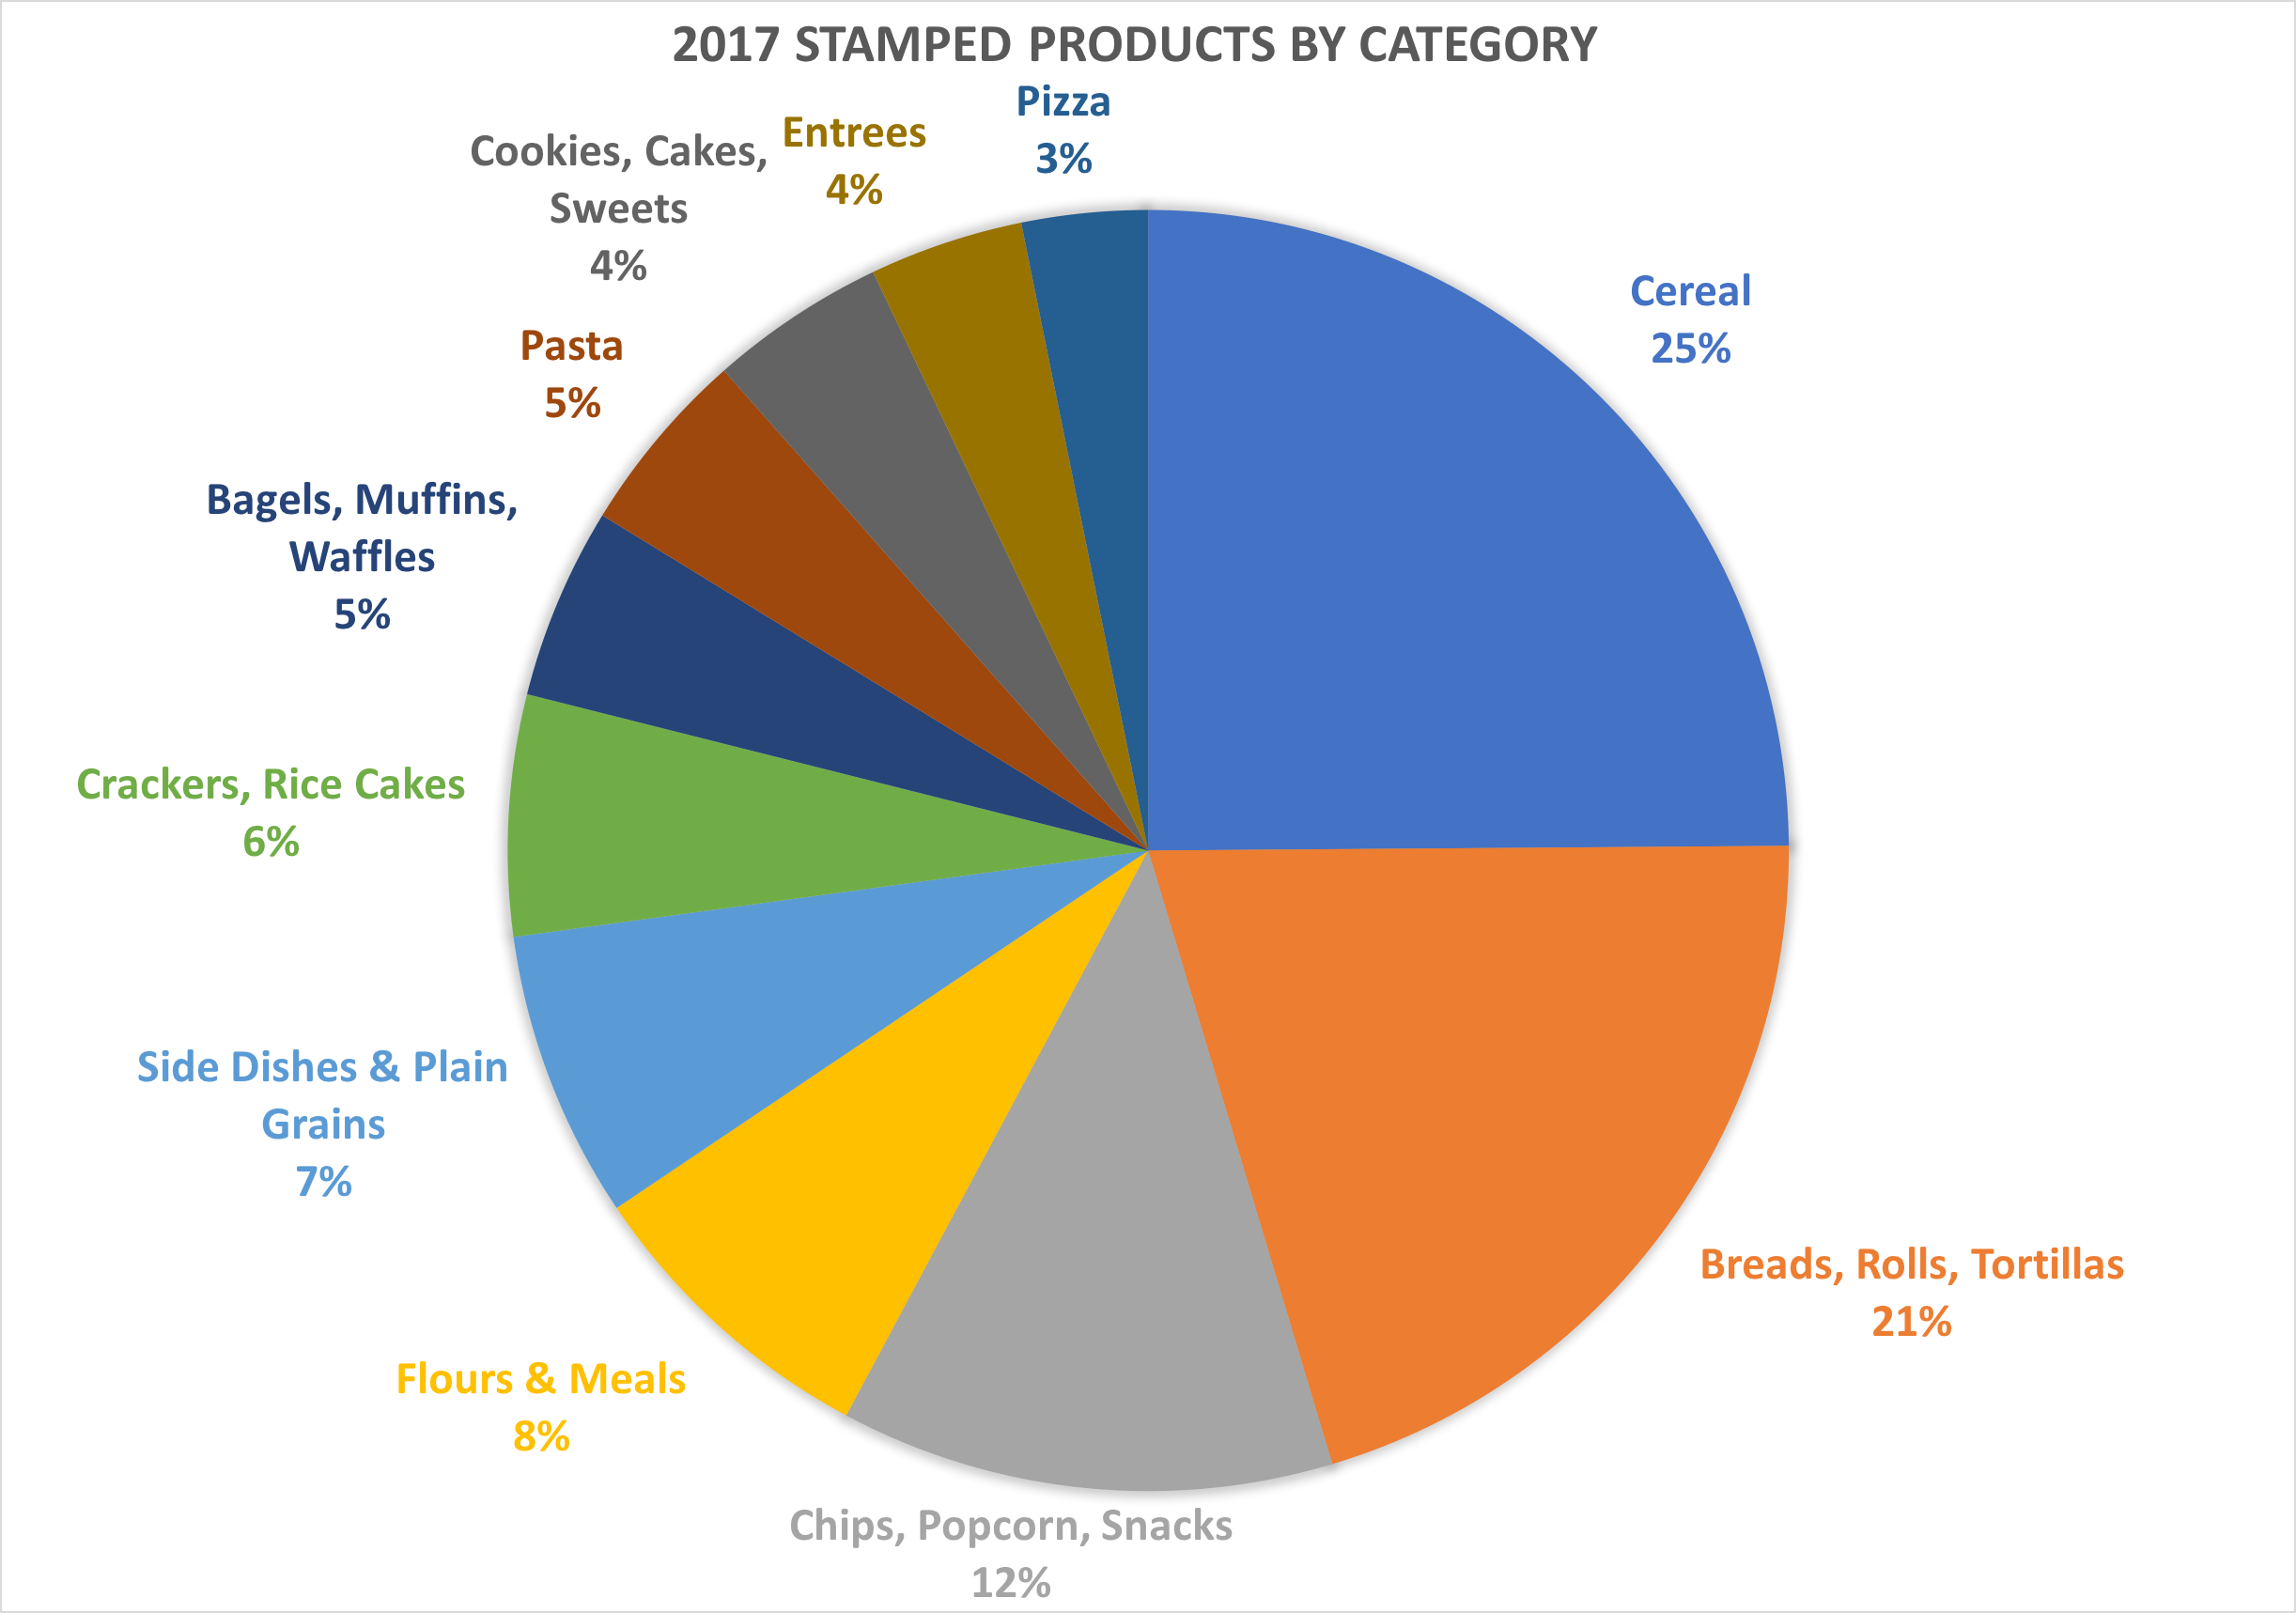 Pie chart of product categories for 2017